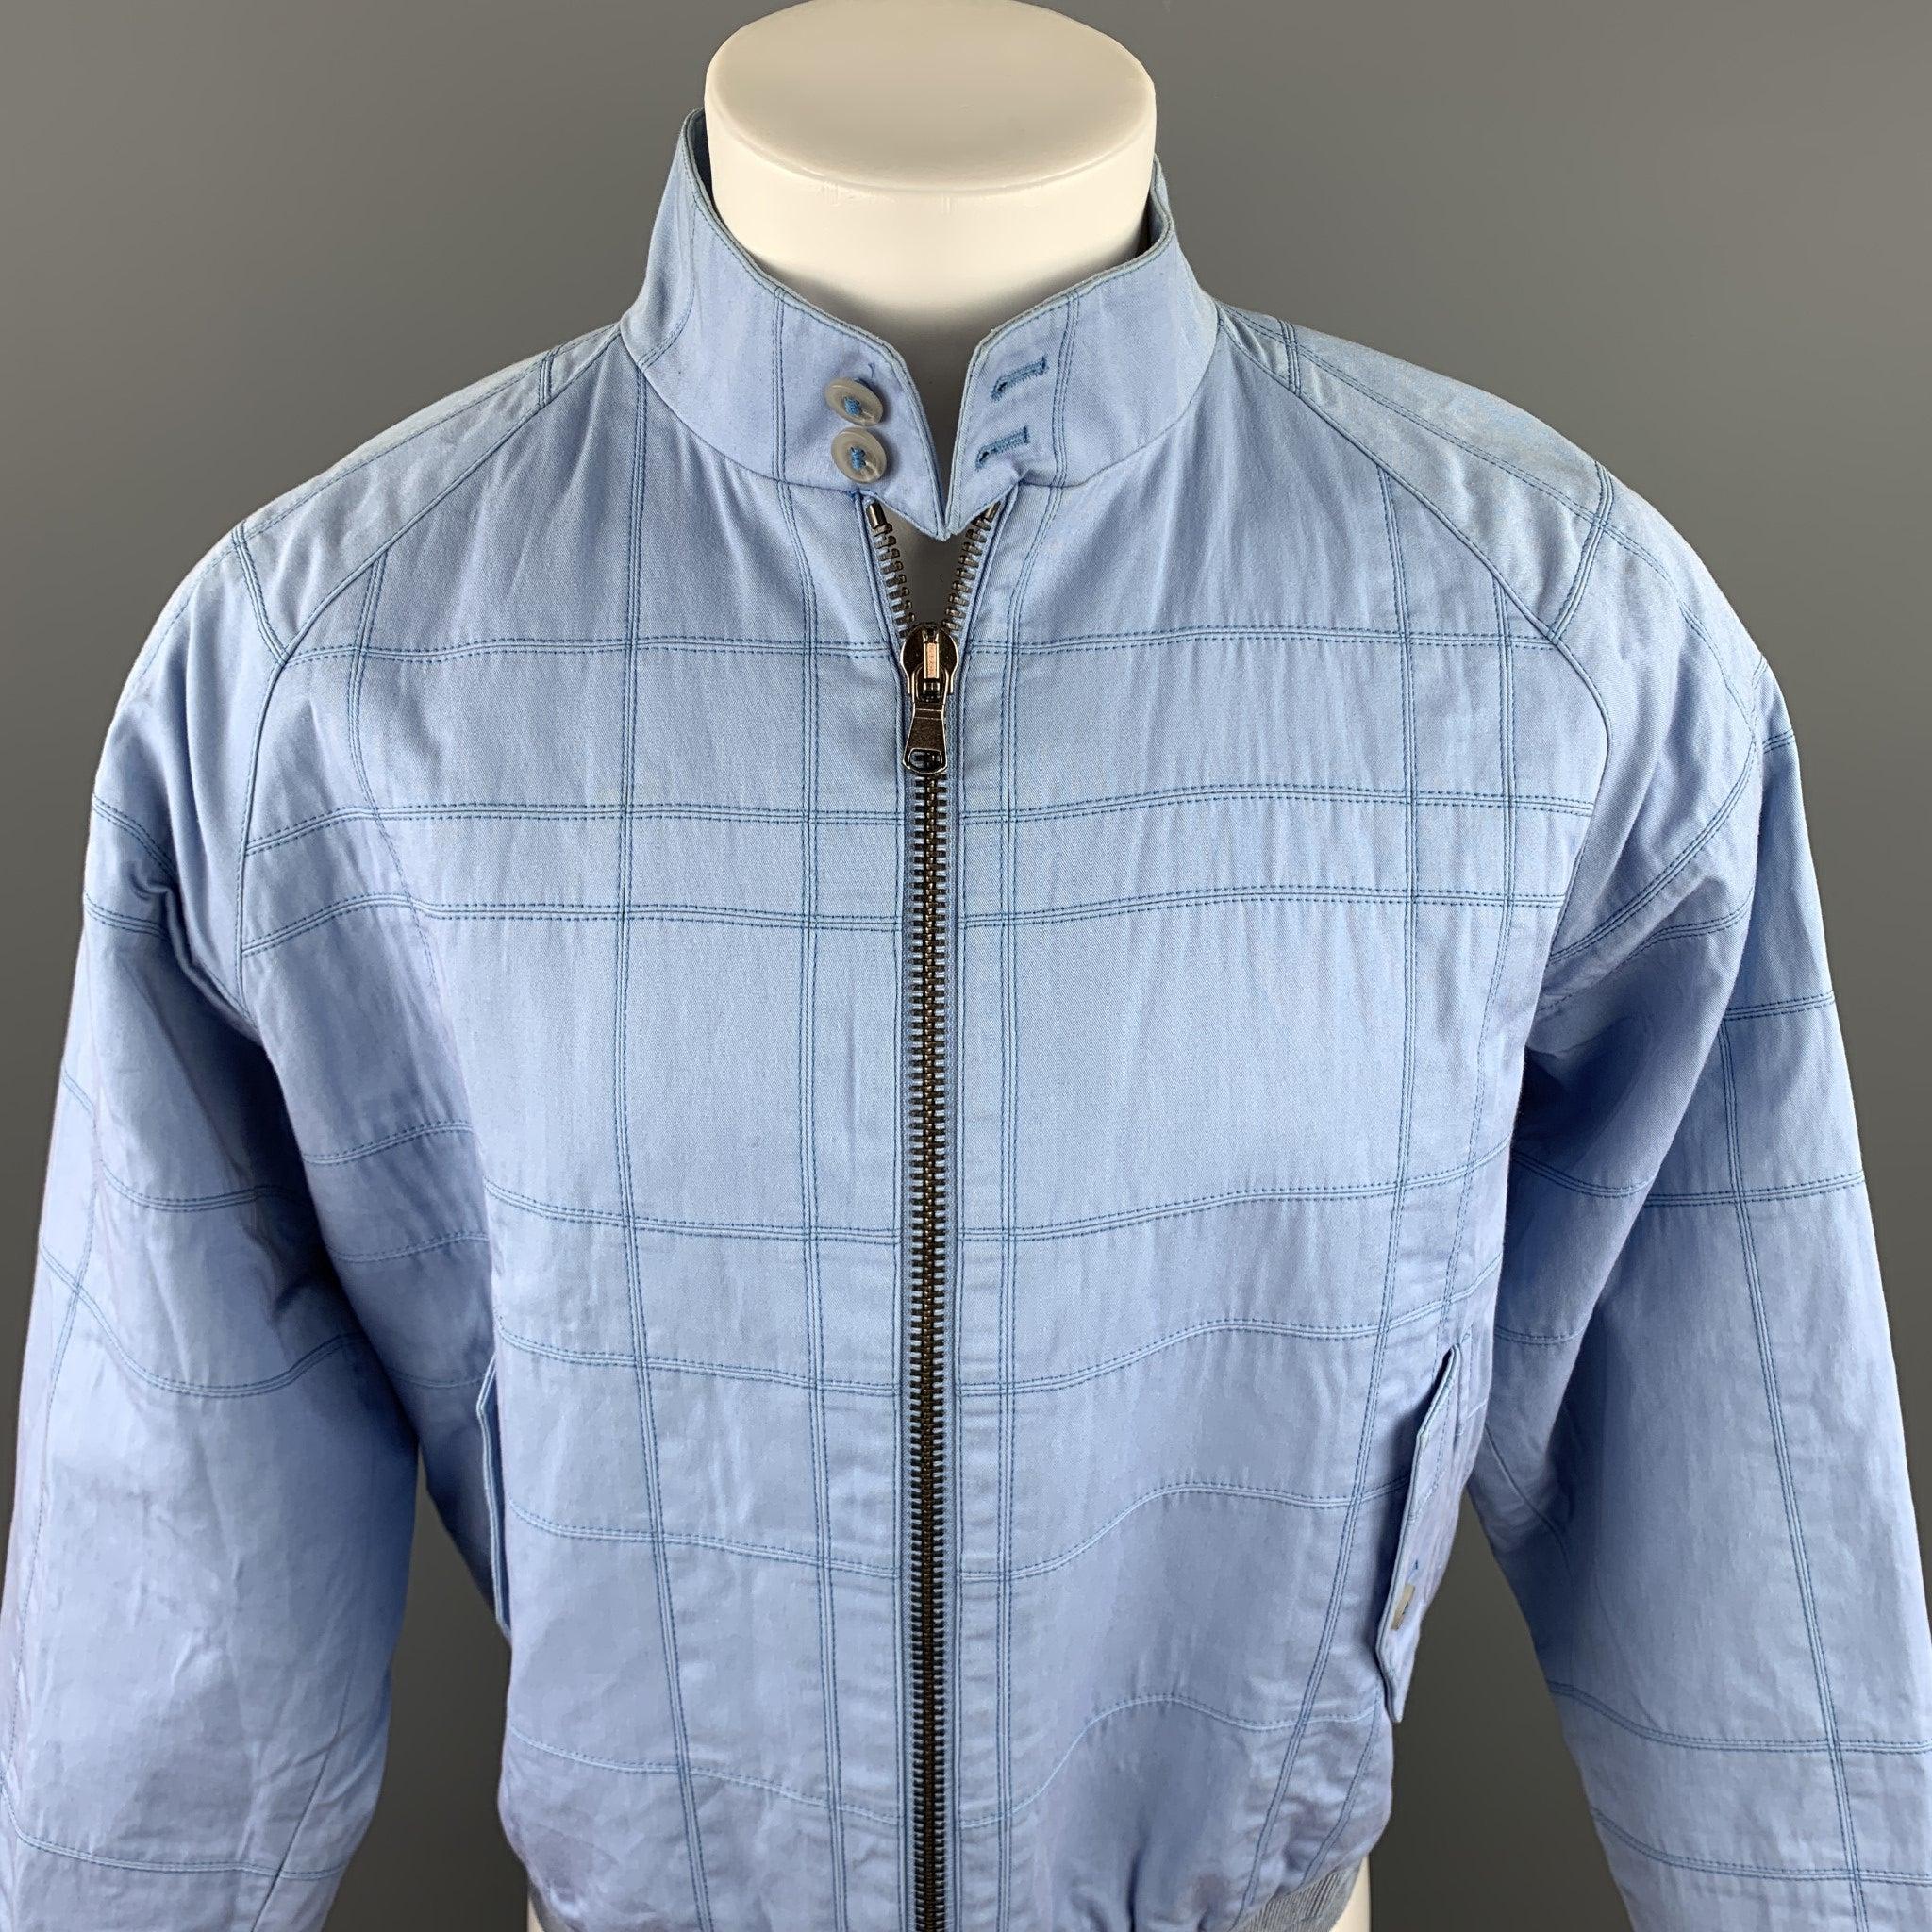 CALVIN KLEIN COLLECTION jacket comes in a light blue stitched cotton / acrylic featuring a buttoned collar, flap pockets, and a zip up closure. Made in Italy.Very Good
Pre-Owned Condition. 

Marked:   48/38 

Measurements: 
 
Shoulder: 17 inches